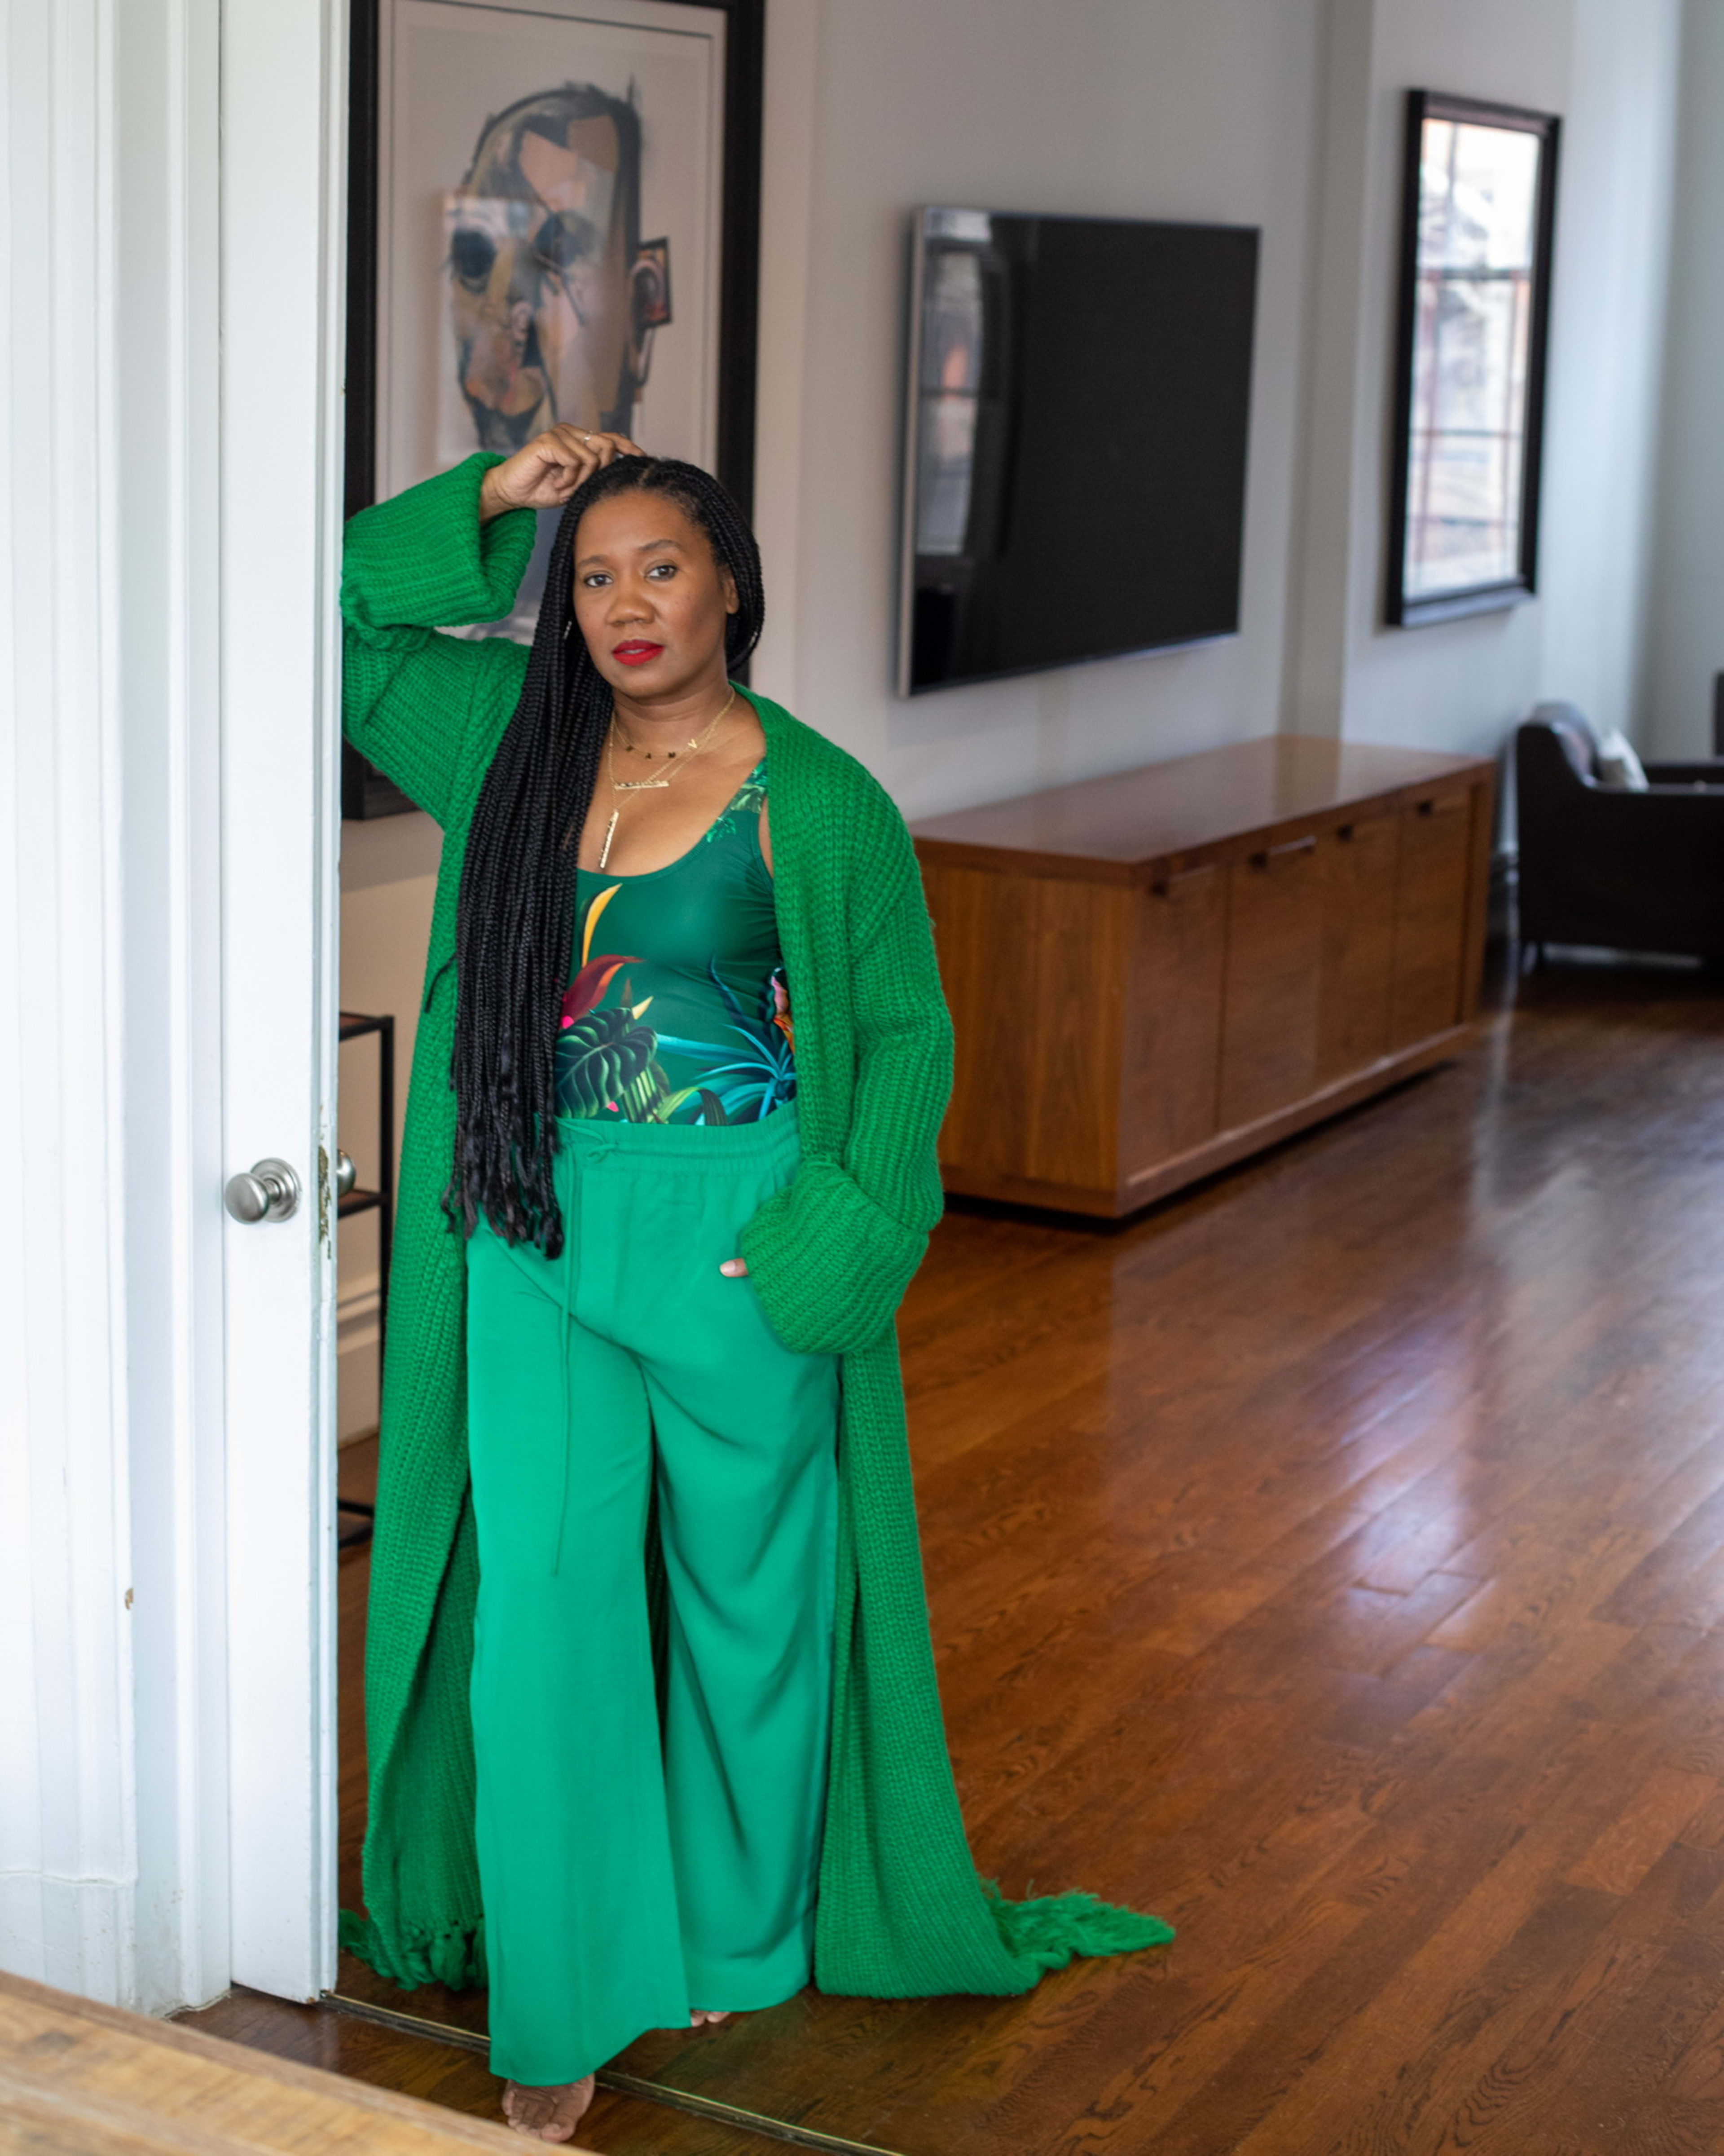 A fashion model in a green outfit posing for a photoshoot.